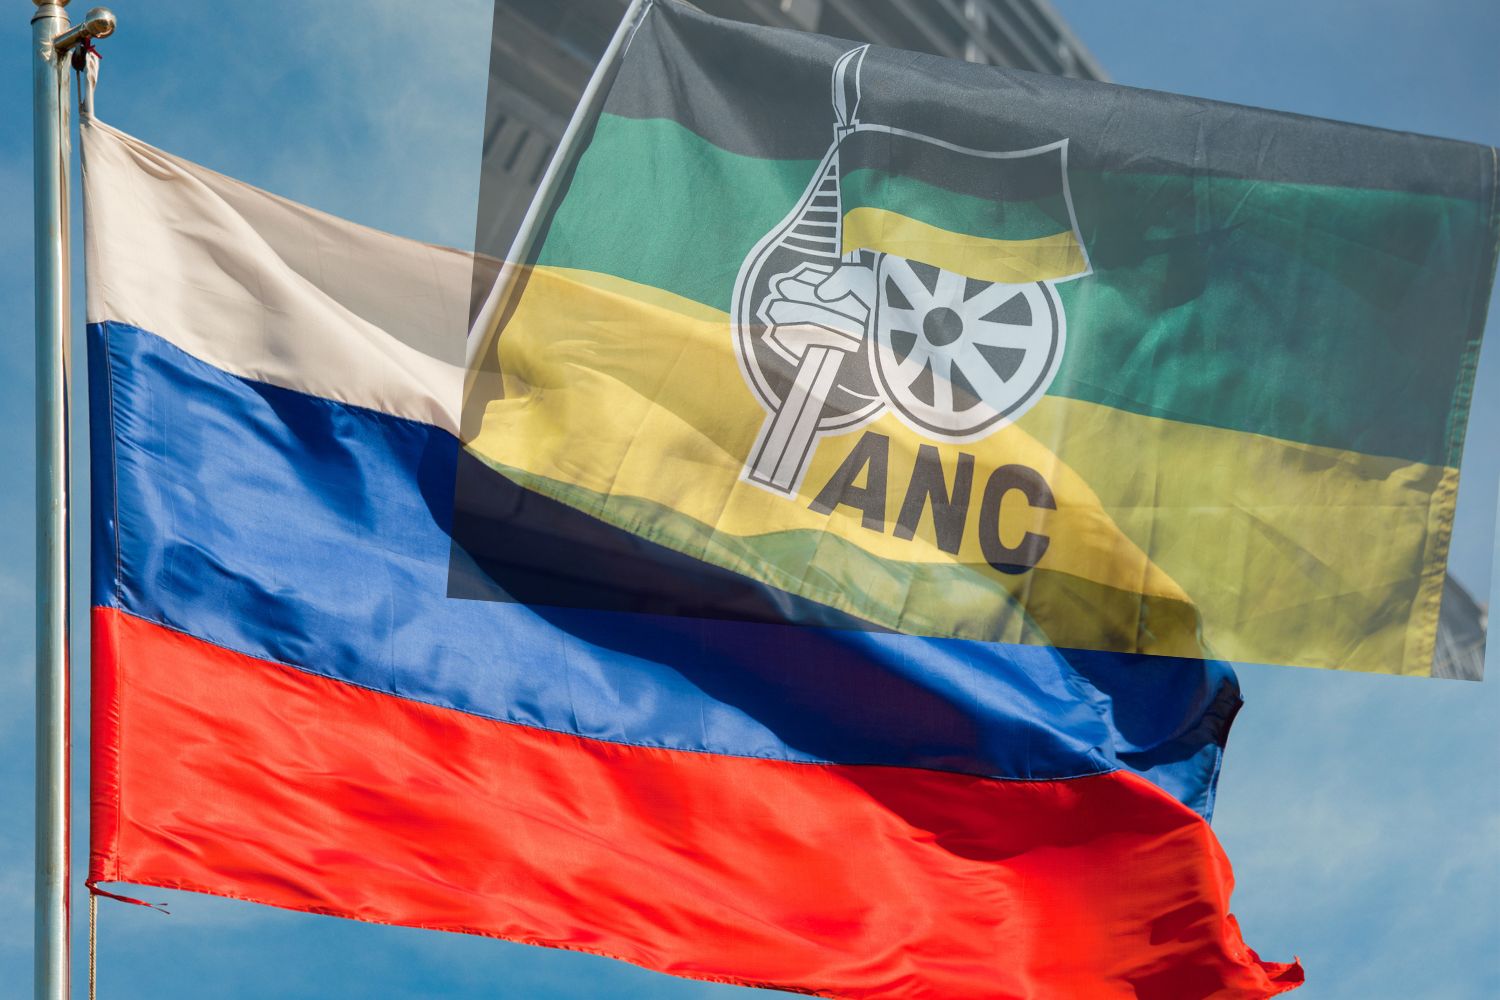 Senior members of South Africa’s ruling ANC party in Russia ahead of BRICS summit in Pretoria